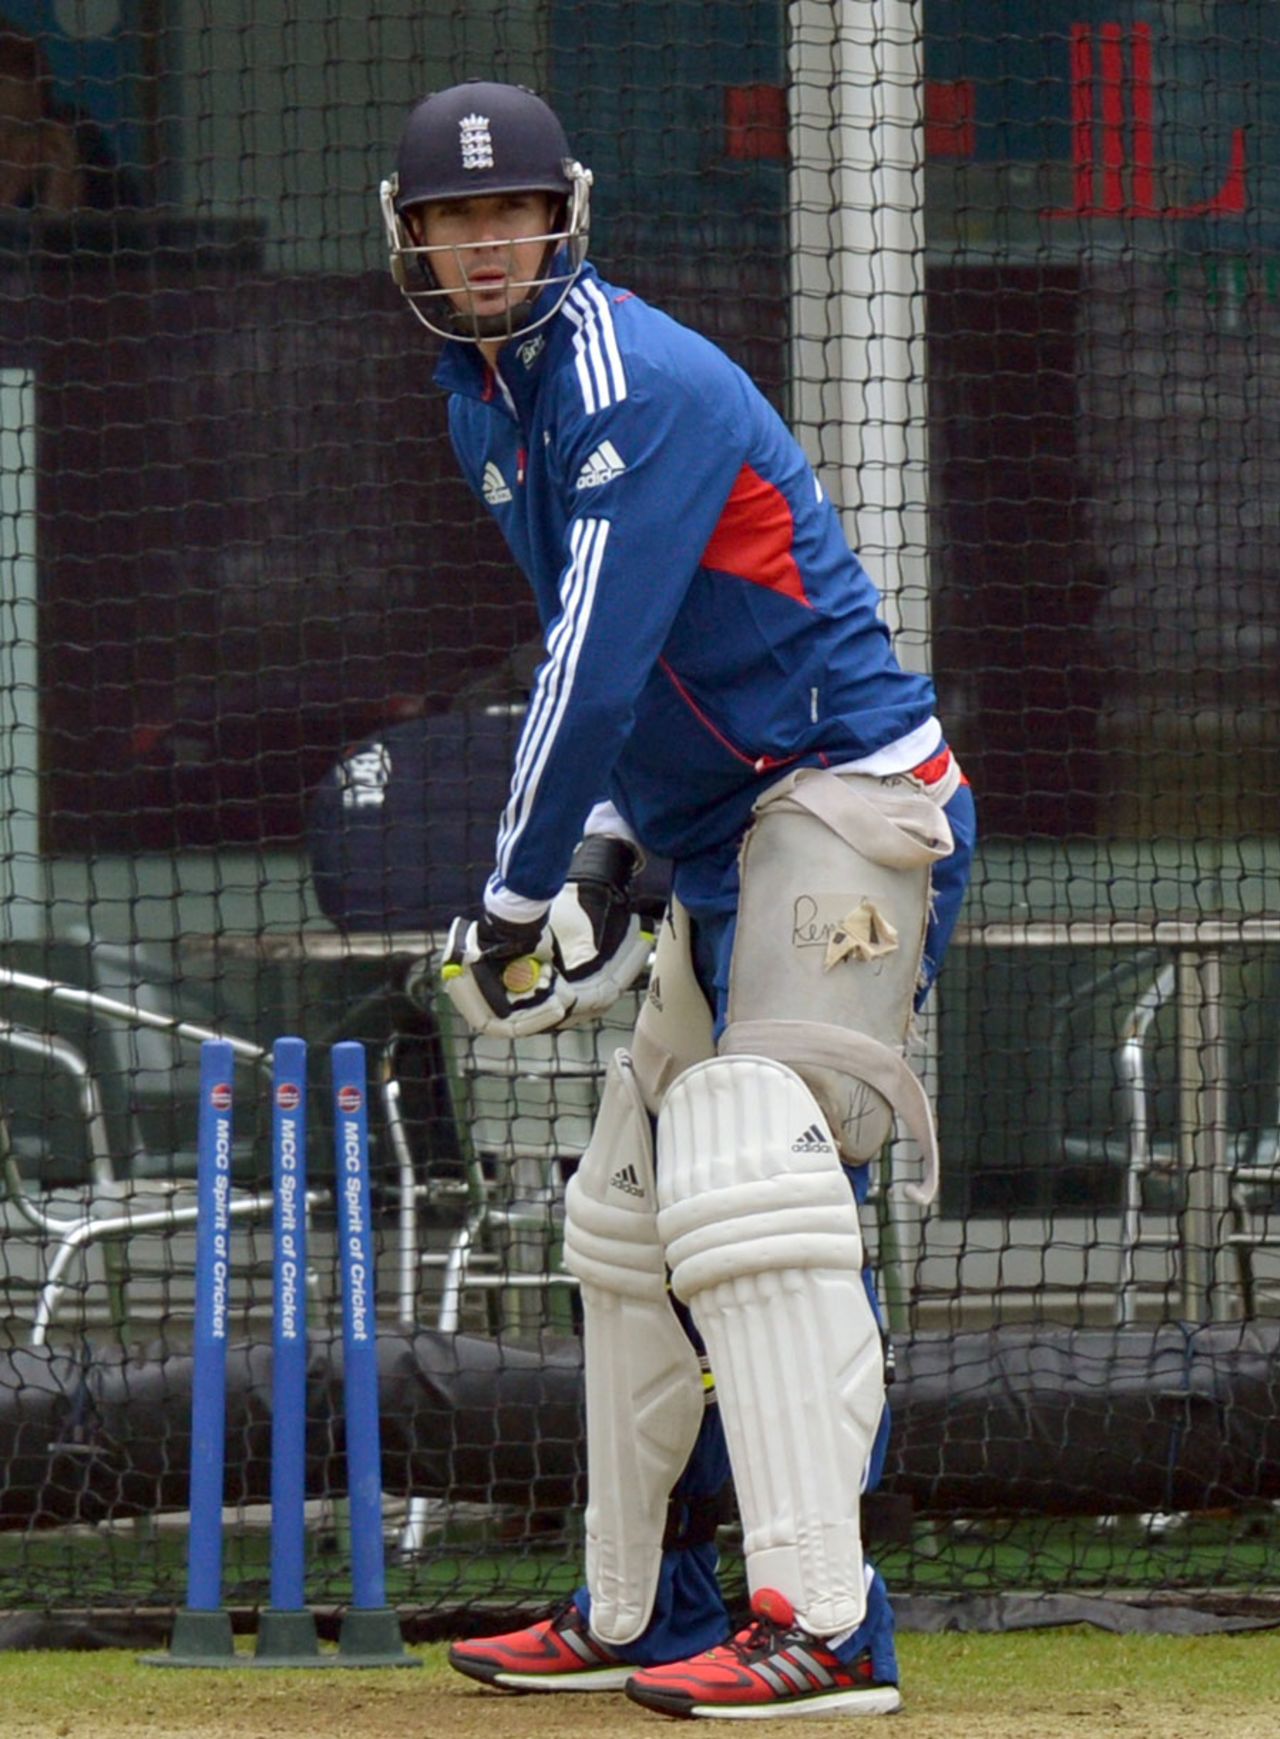 On the way back: Kevin Pietersen was at Lord's for a net session, Lord's, May 30, 2013